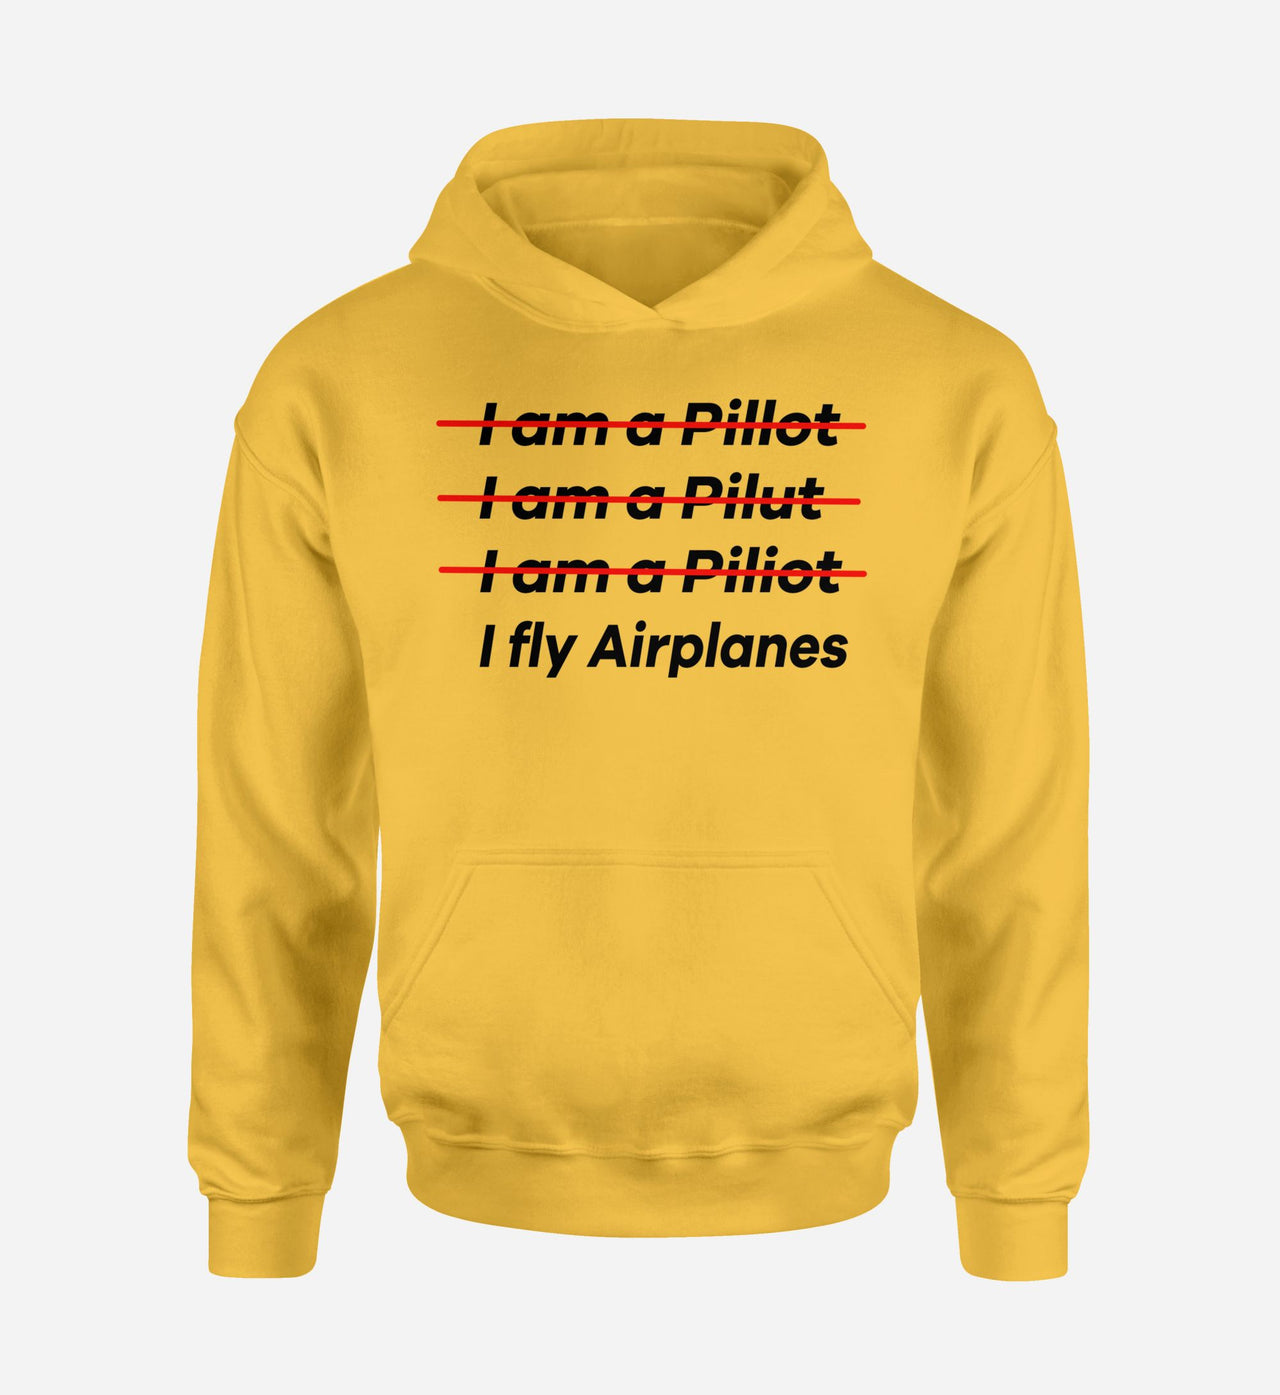 I Fly Airplanes Designed Hoodies